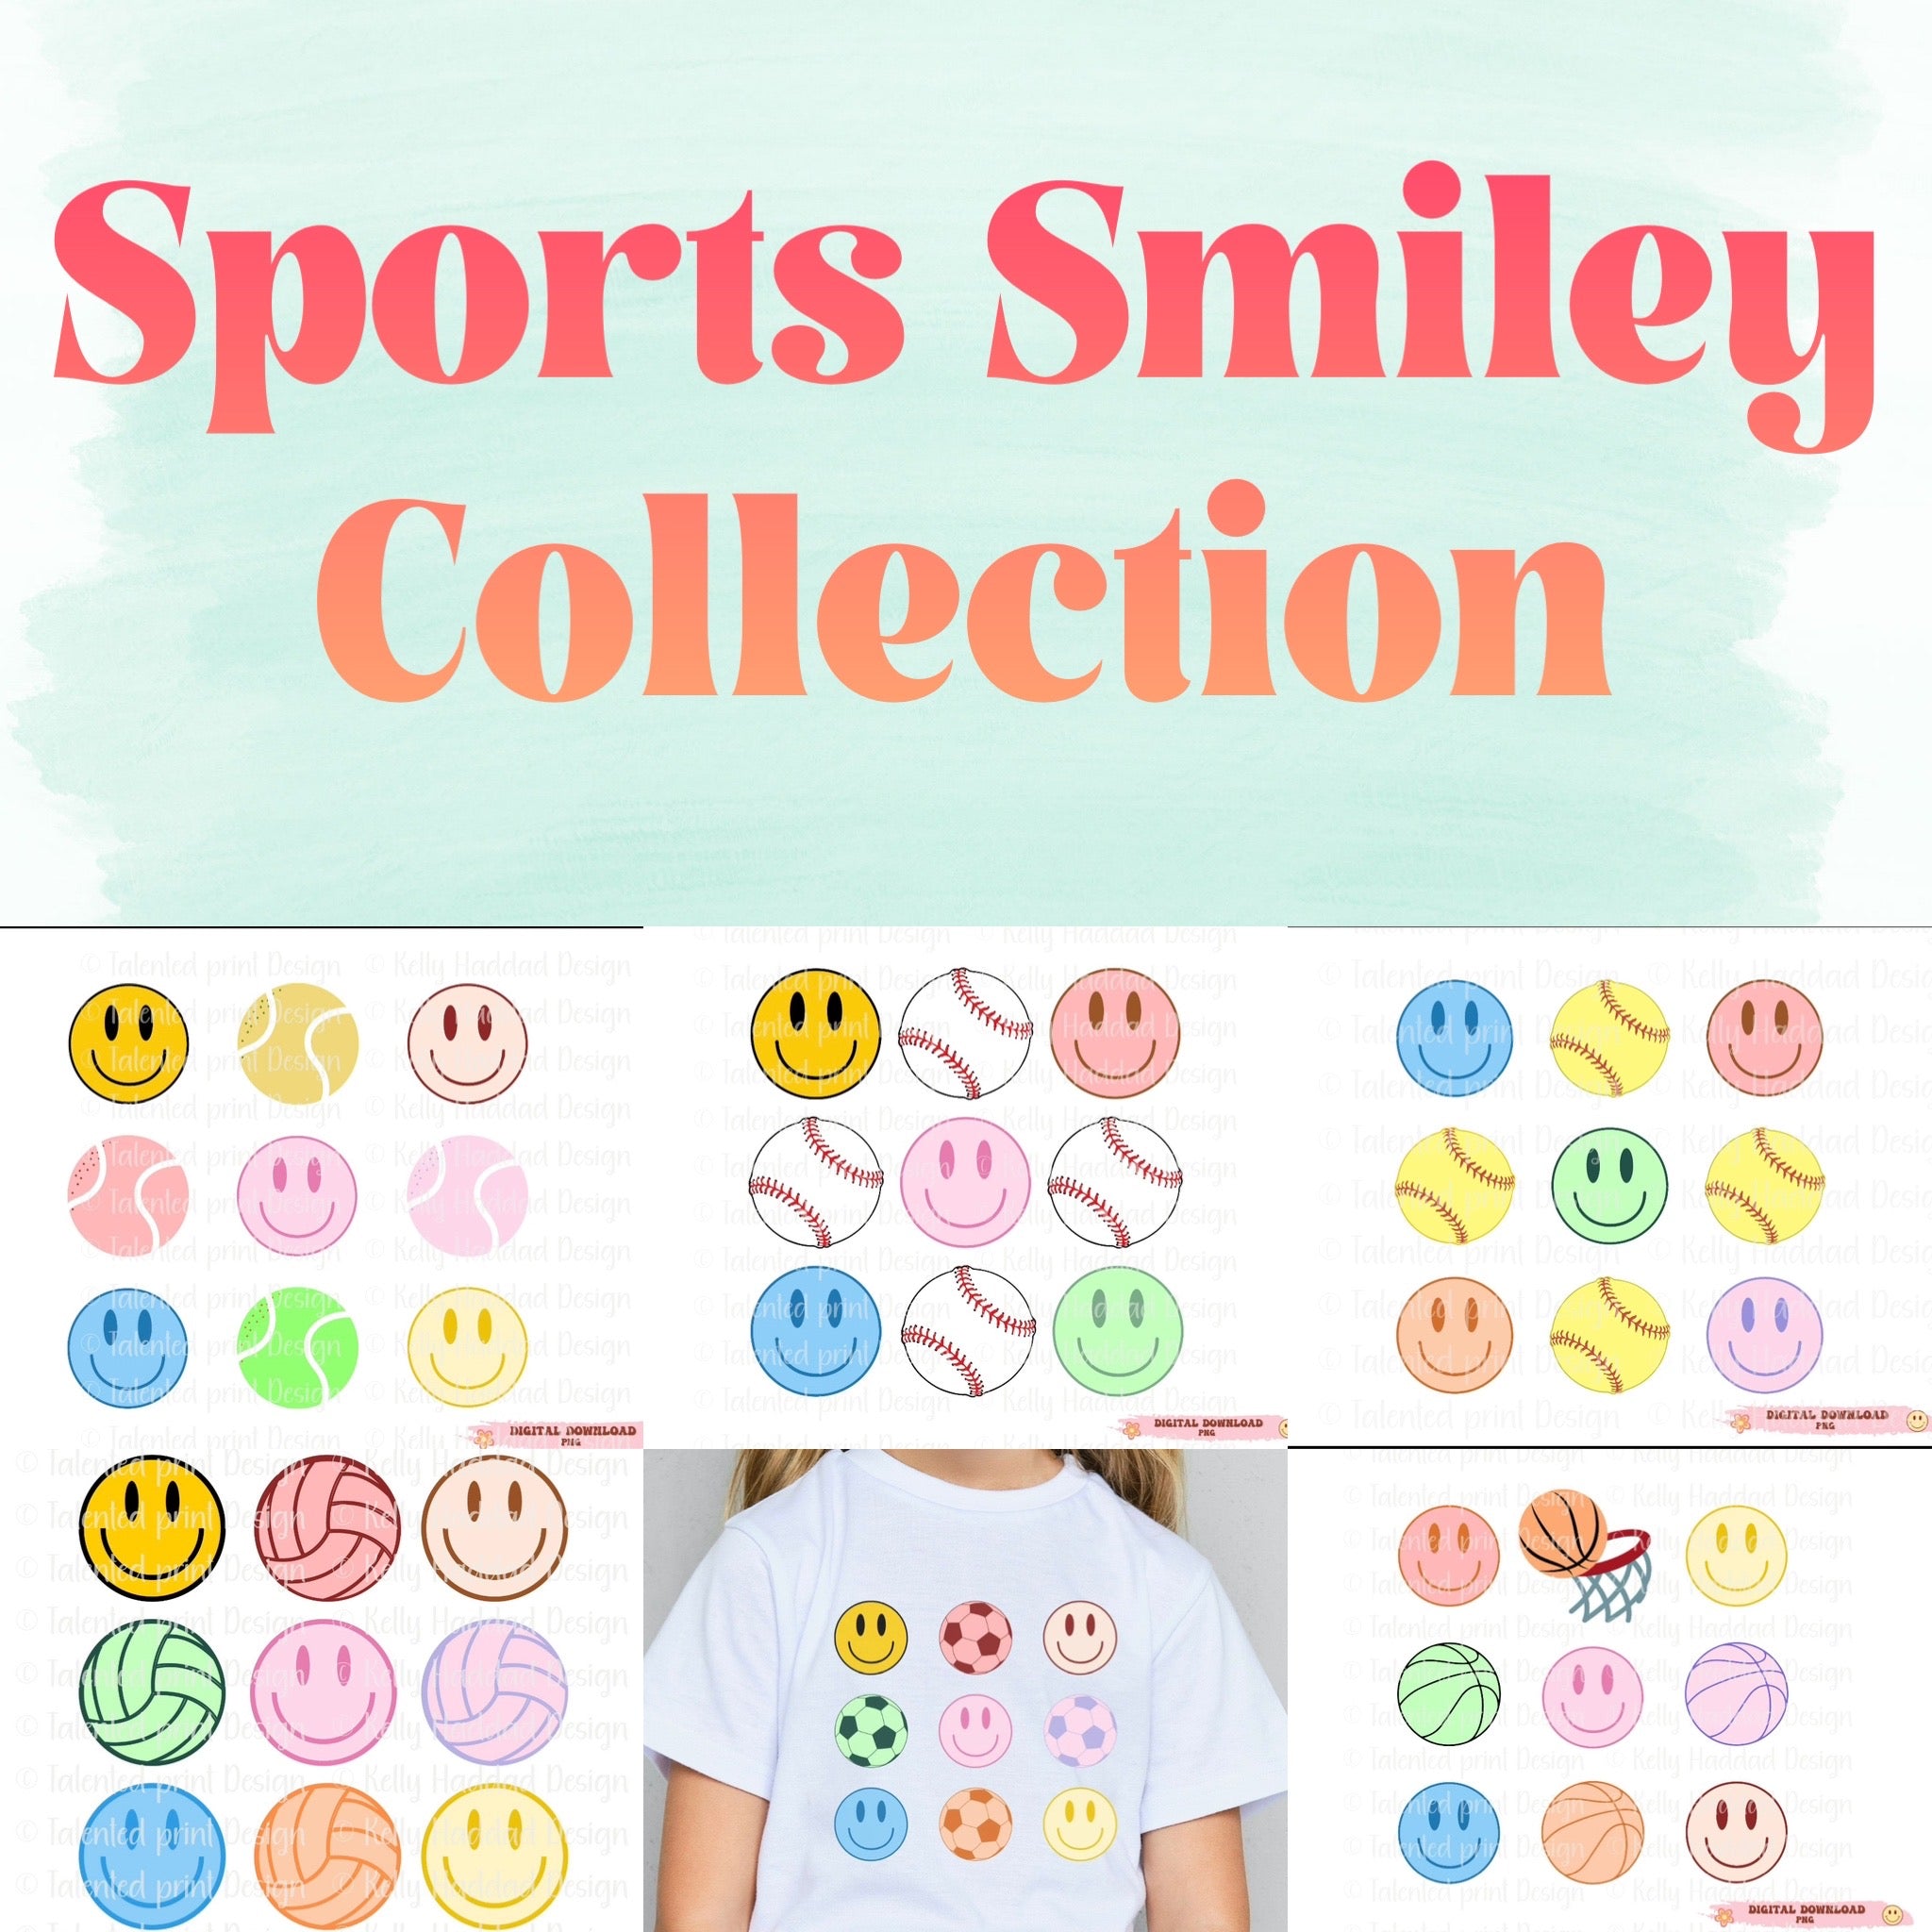 Sports Smiley Collection